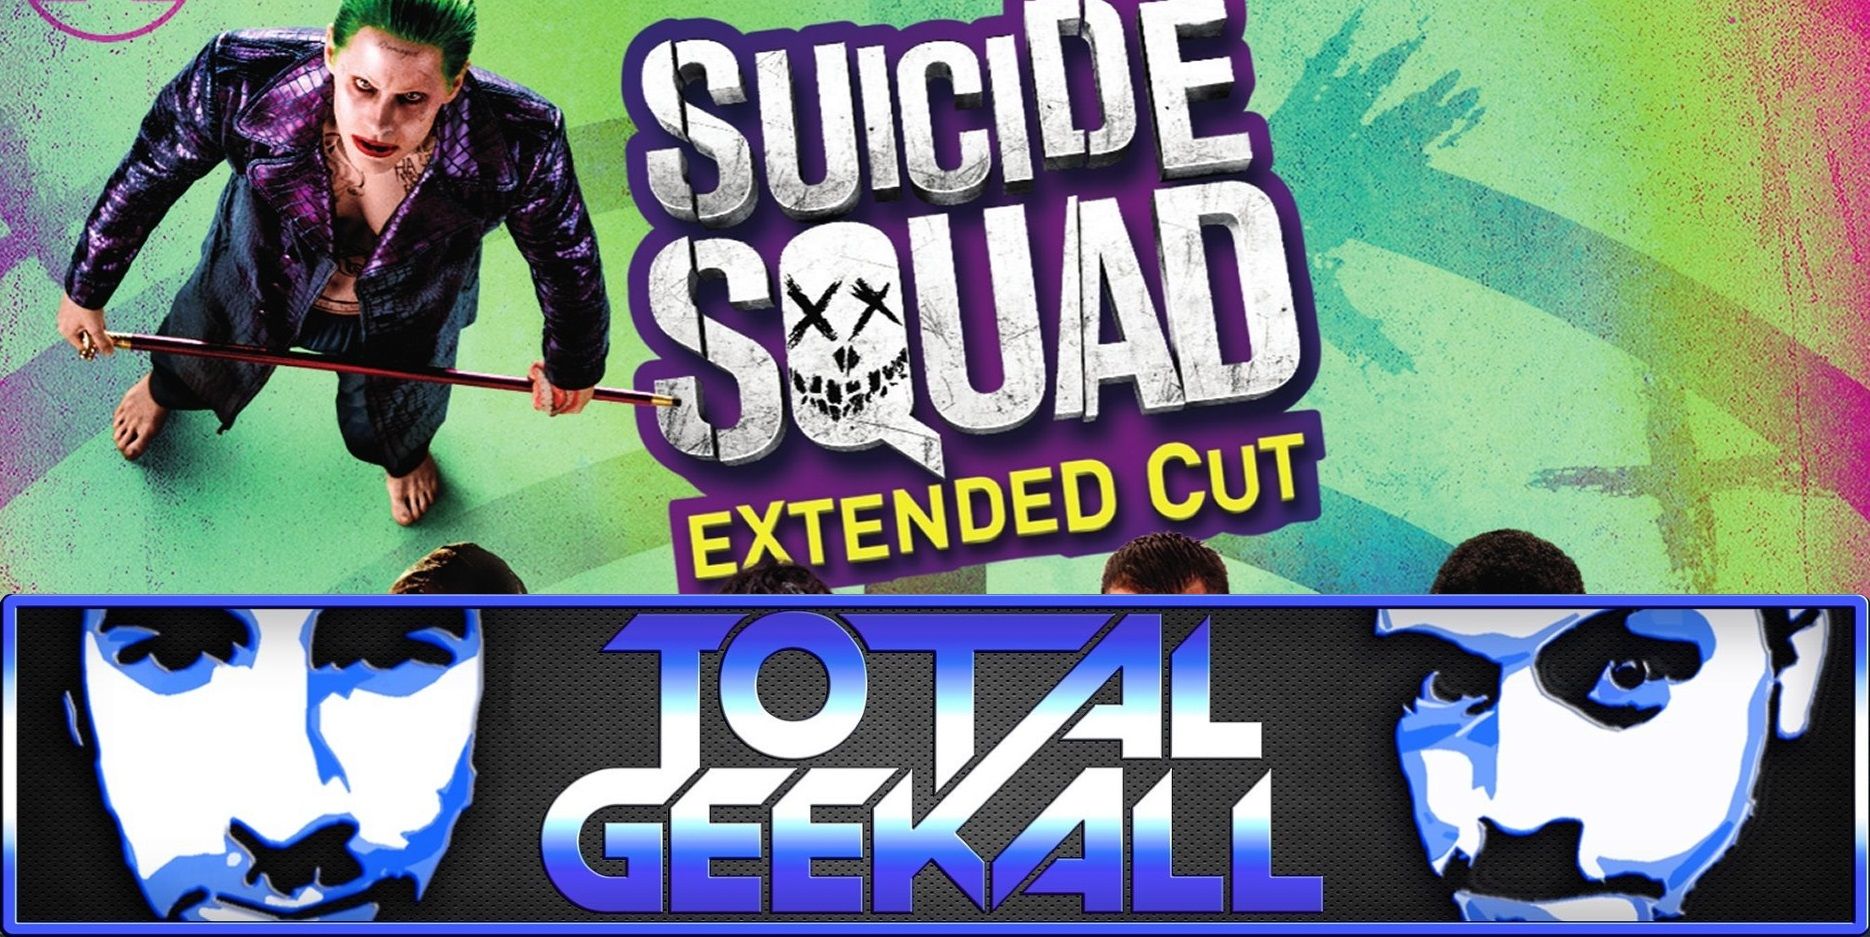 Suicide Squad Extended Cut Total Geekall